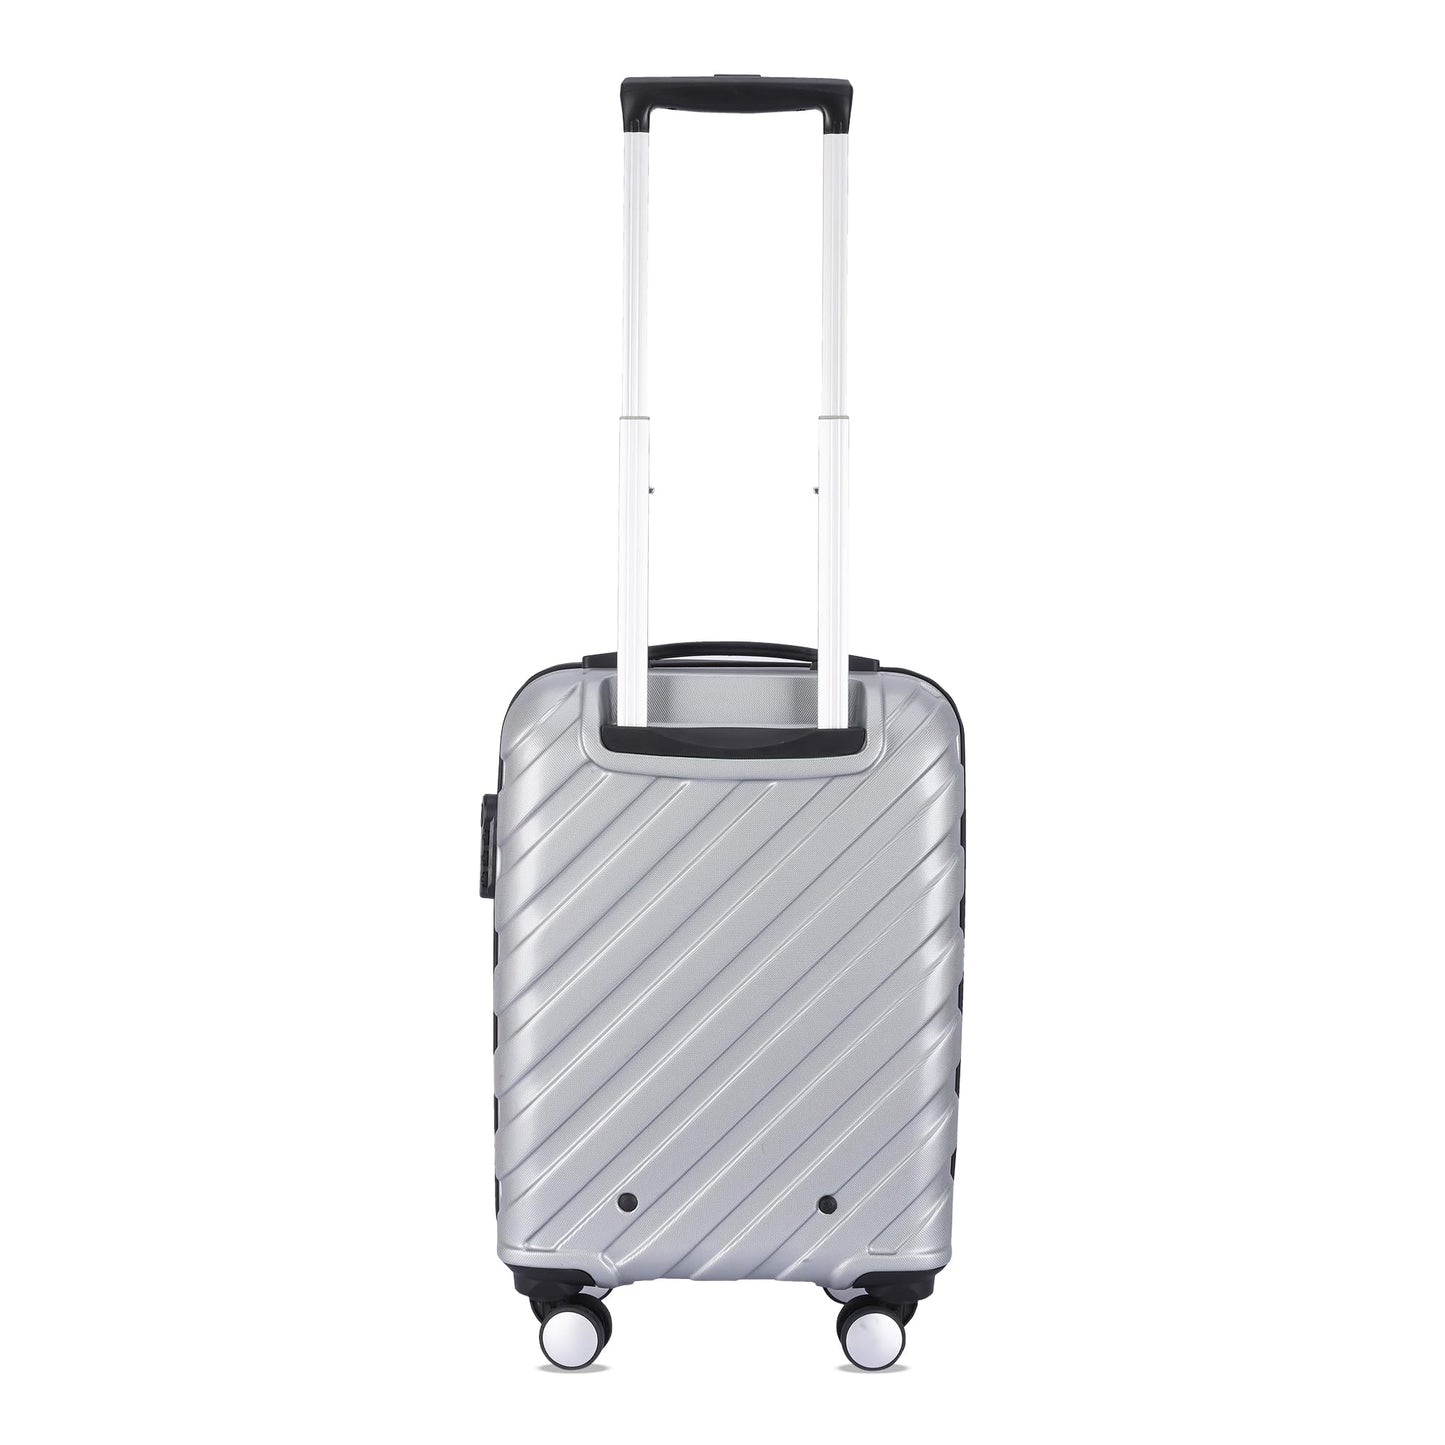 THE CLOWNFISH Wanderwheels Series Luggage ABS Hard Case Suitcase Eight Wheel Trolley Bag- Siver (52 cm- 20.5 inch)